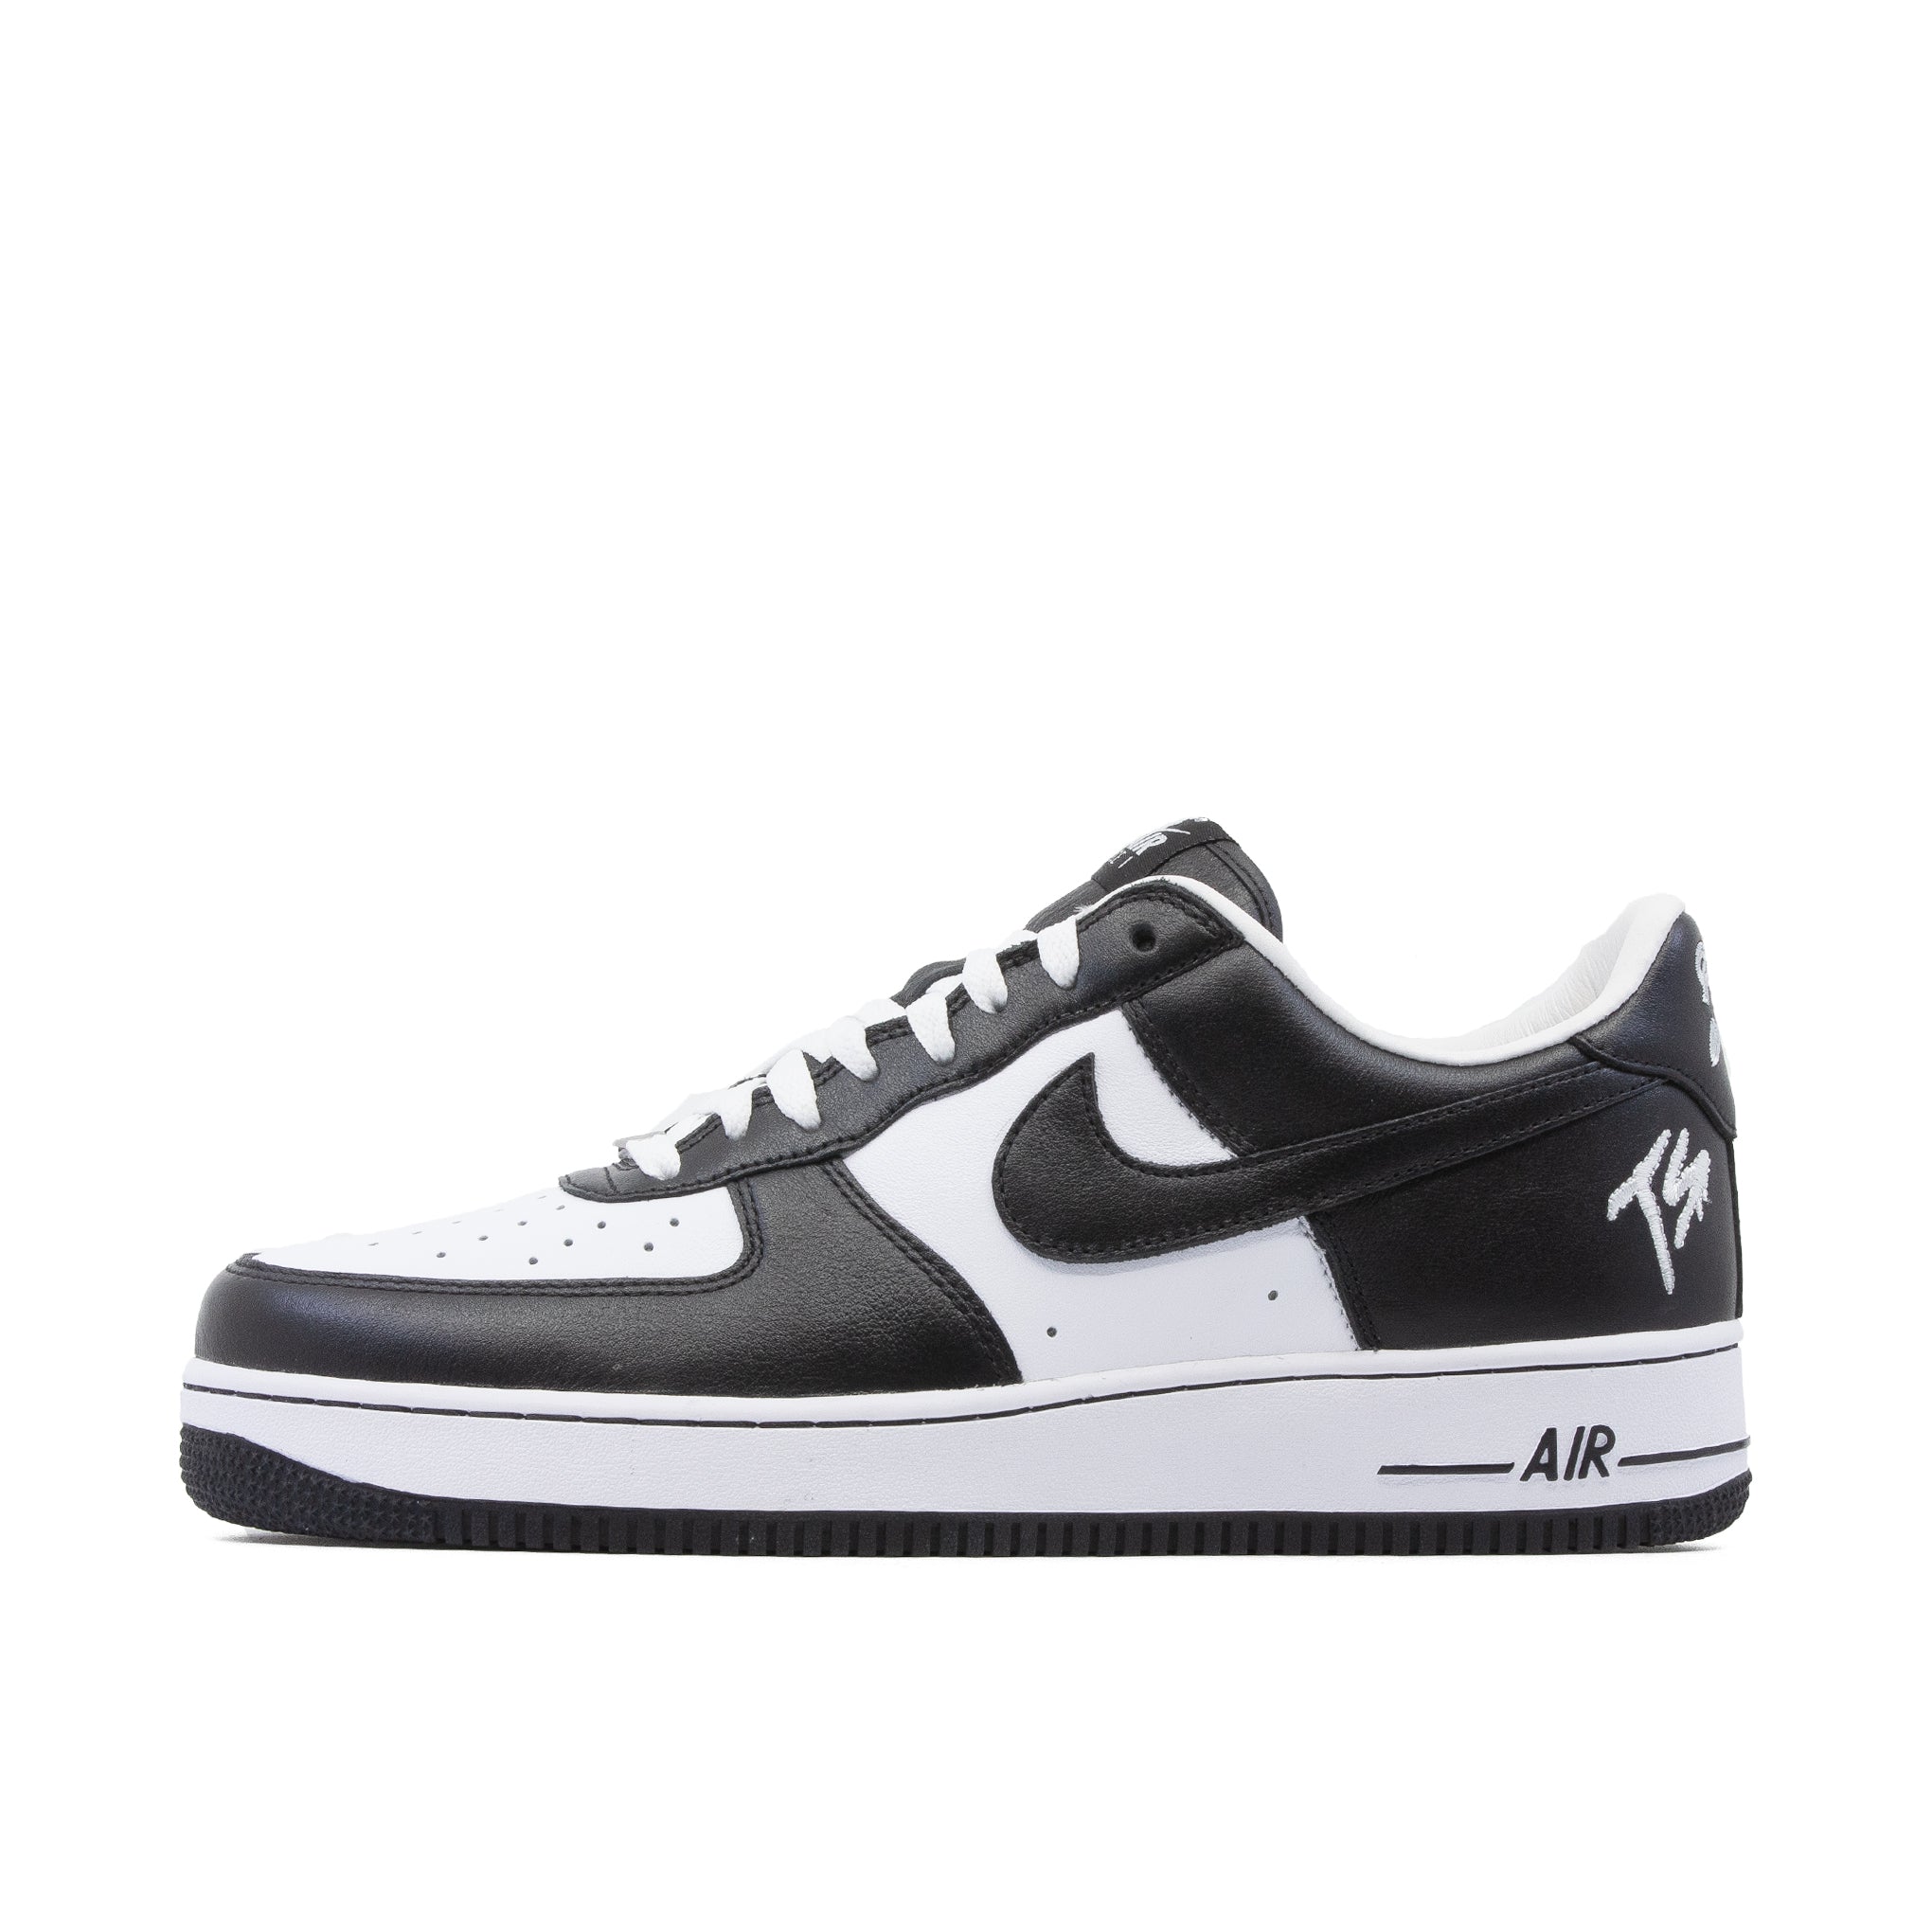 NIKE AIR FORCE 1 LOW TERROR SQUAD BLACKOUT